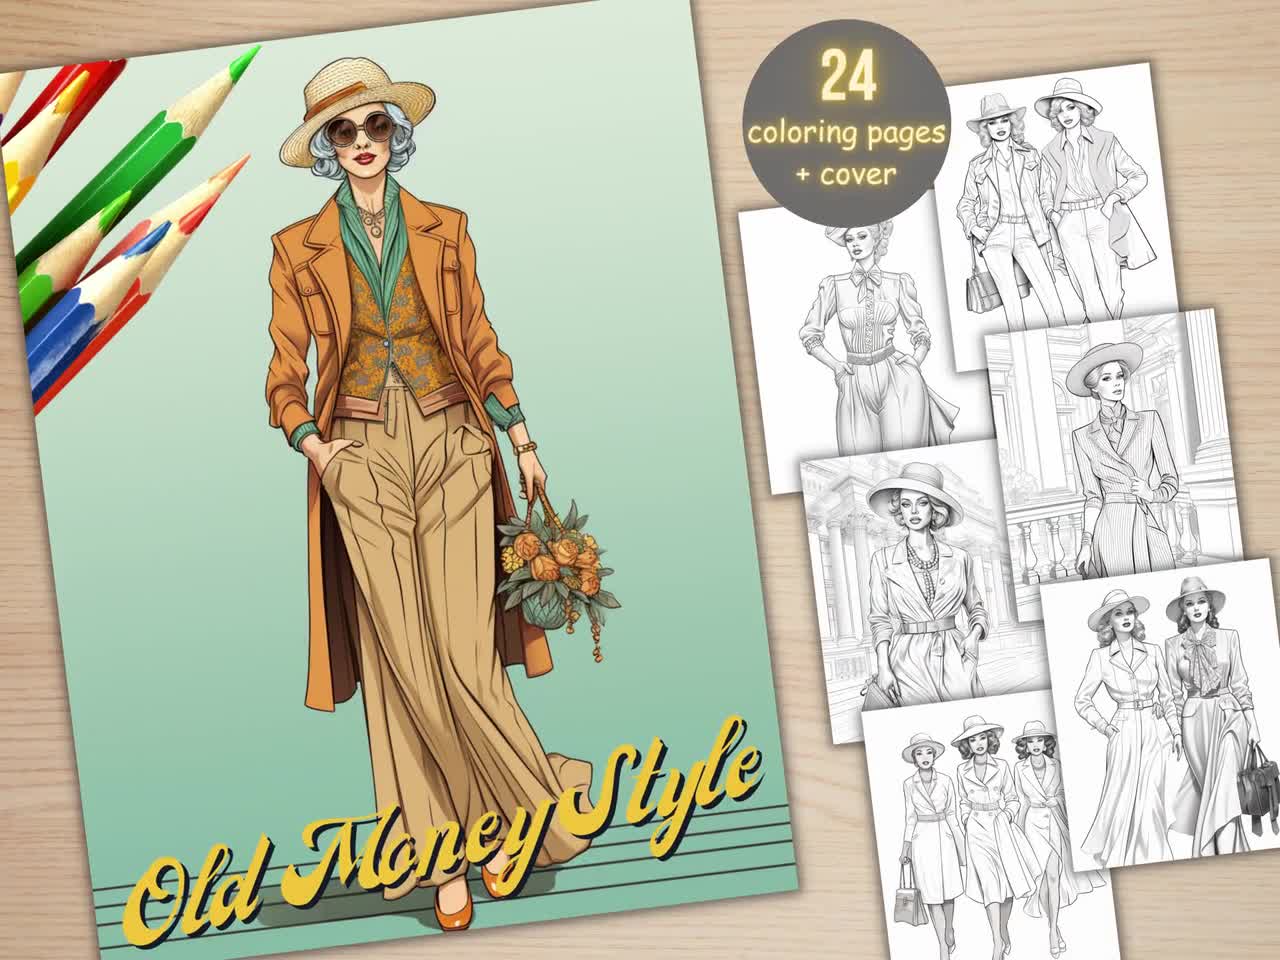 https://v.etsystatic.com/video/upload/q_auto/Old_Money_Style_Coloring_Pages_r774uq.jpg